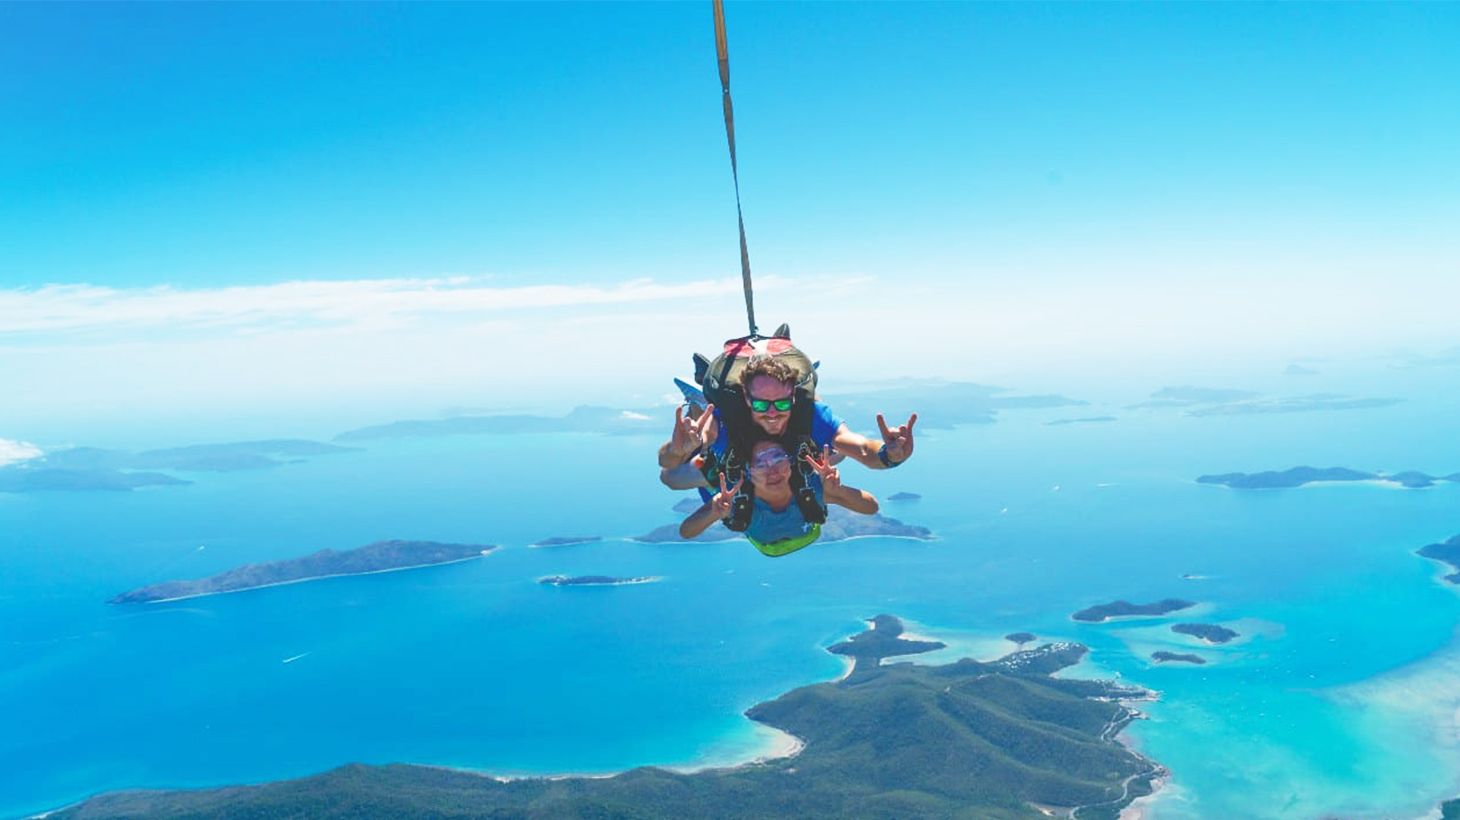 luxuryescapes.com | Queensland: Thrilling Tandem Skydive Experiences Up To 15,000ft